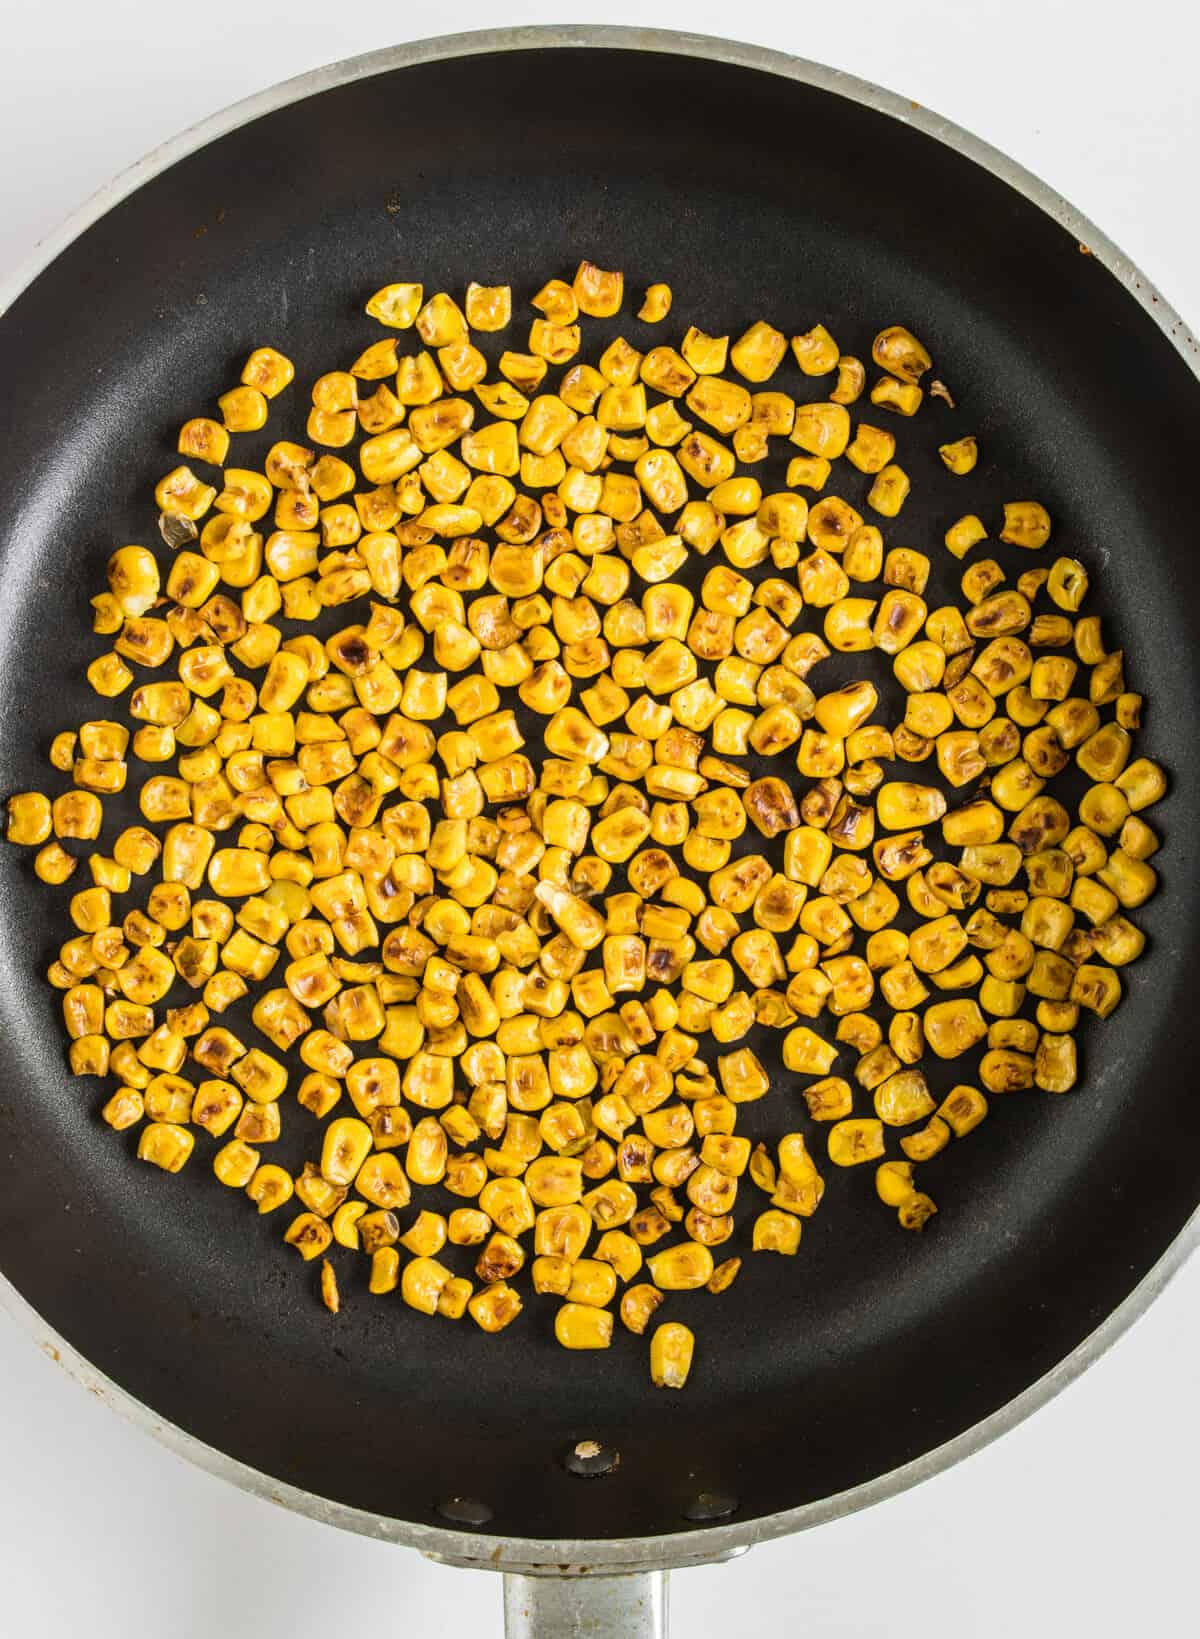 Corn being fried on a pan